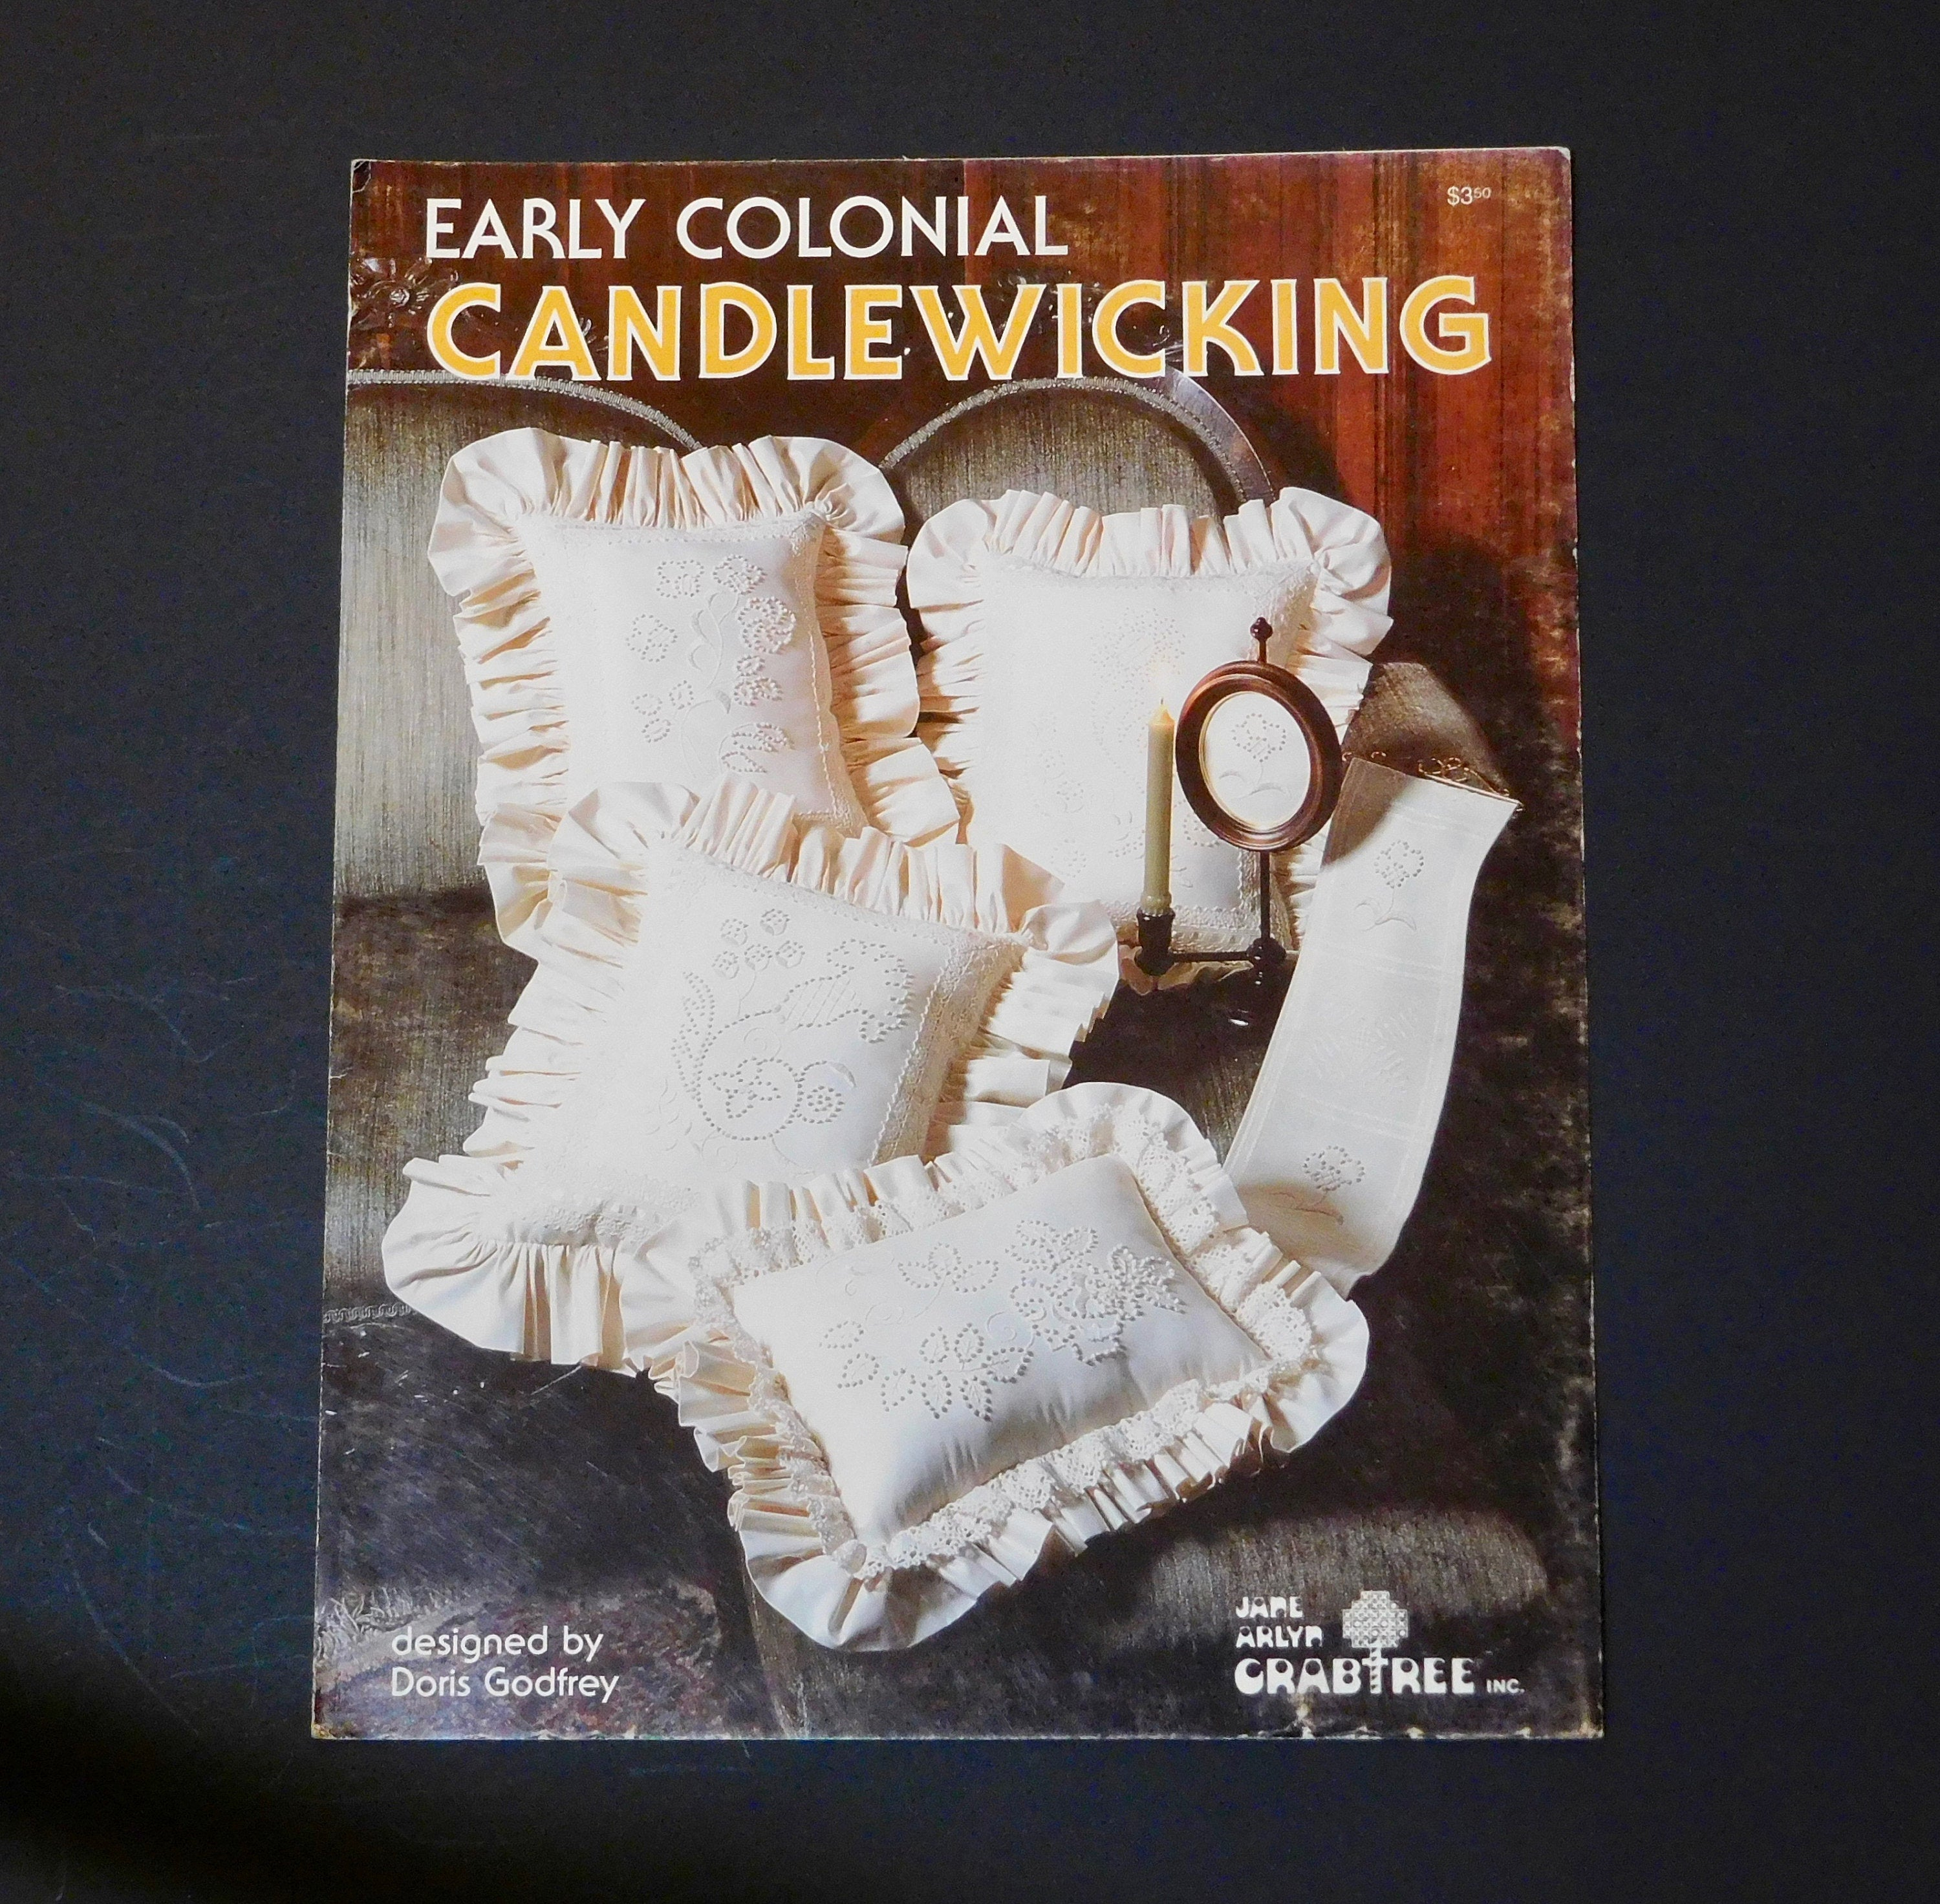 Colonial Embroidery Patterns Early Colonial Candlewicking Embroidery Patterns 1983 Crabtree Inc Designs Doris Godfrey